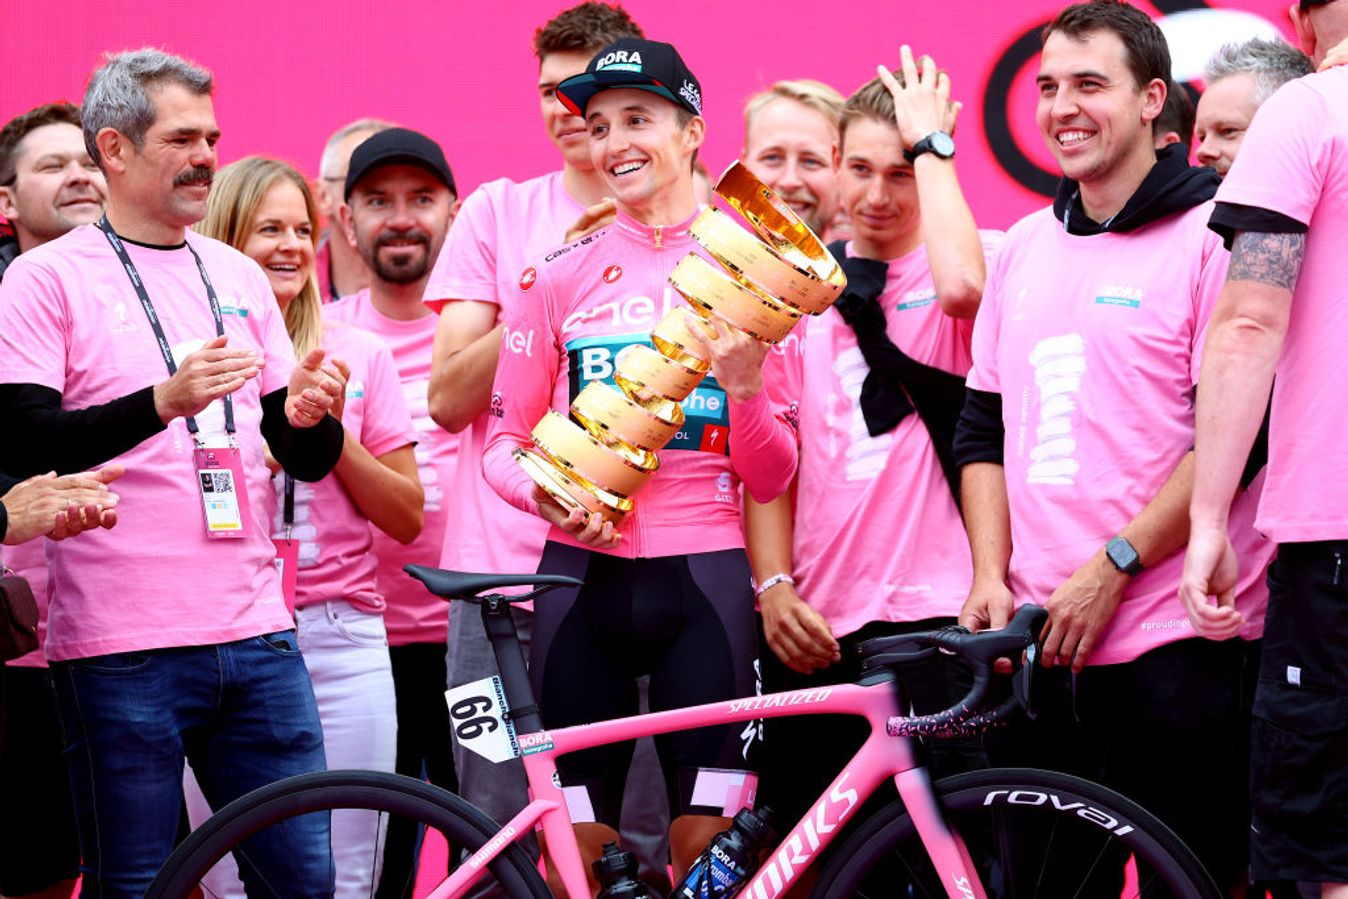 Denk (left) watches on as Jai Hindley lifts the 2022 Giro d'Italia trophy - his team's first Grand Tour victory